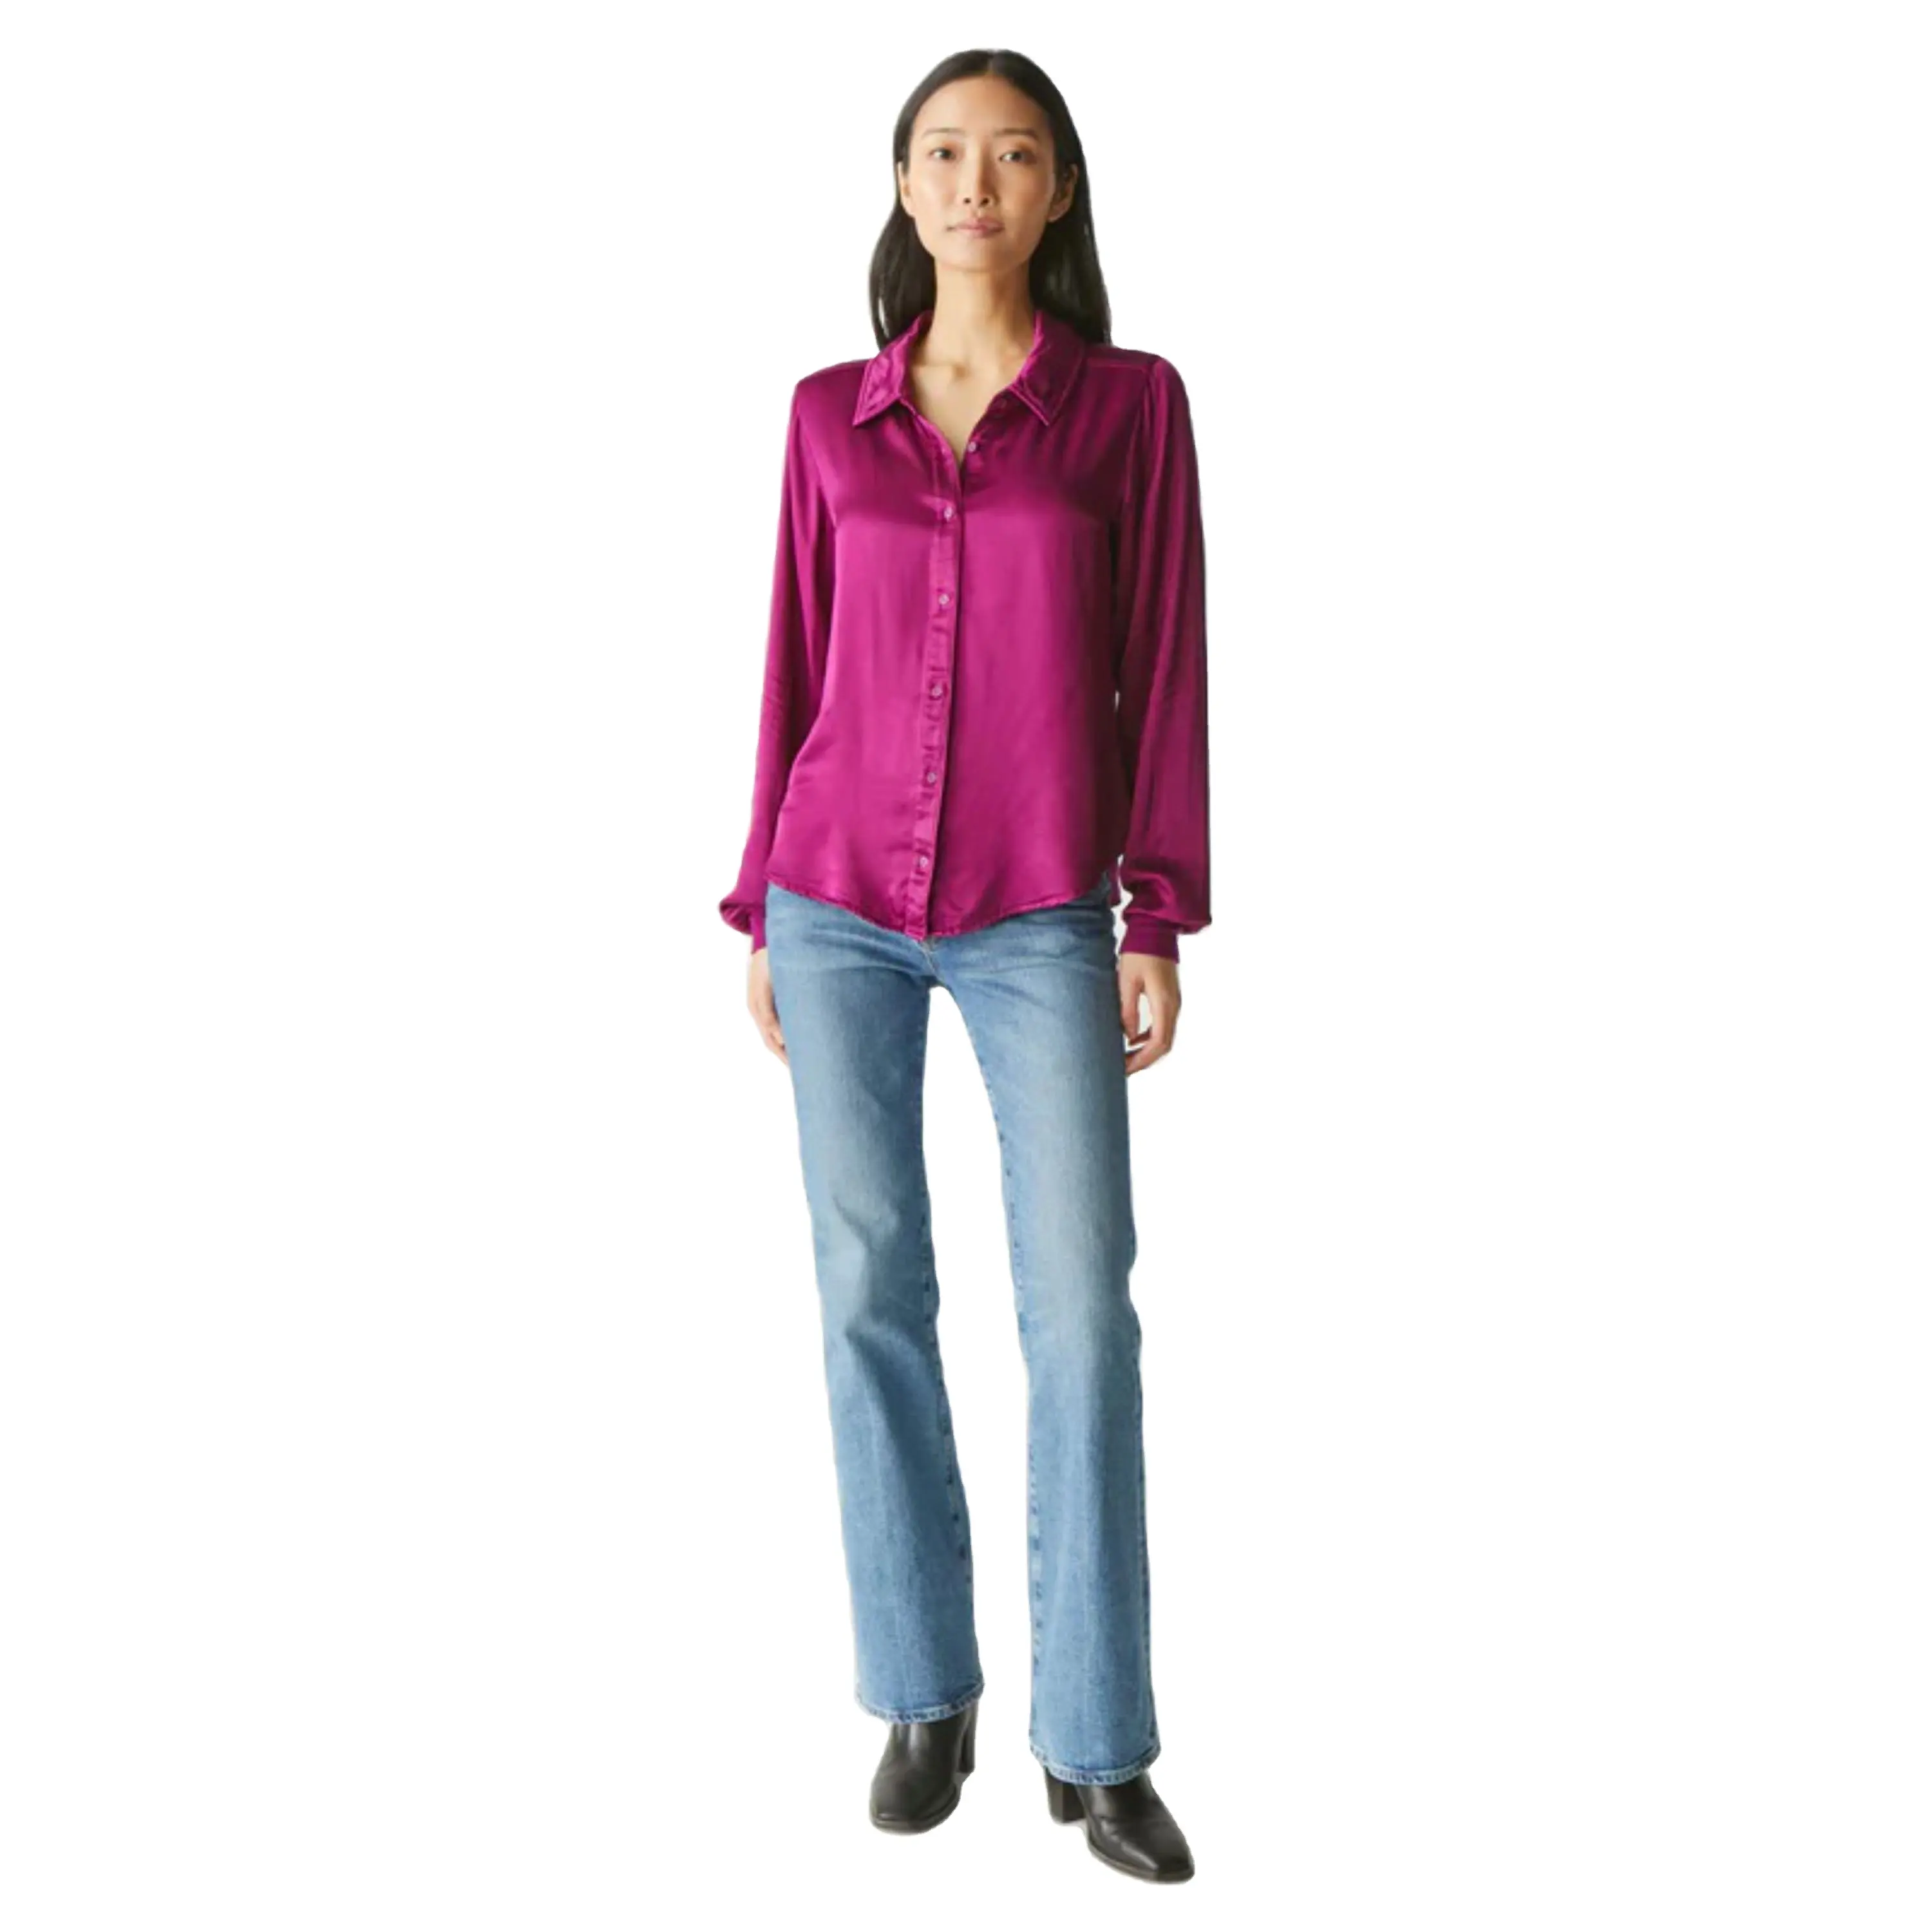 Stylish Women's Satin Blouse - Smooth and Silky Texture, Ideal for Professional and Casual Wear, Comes in a Variety of Shades"